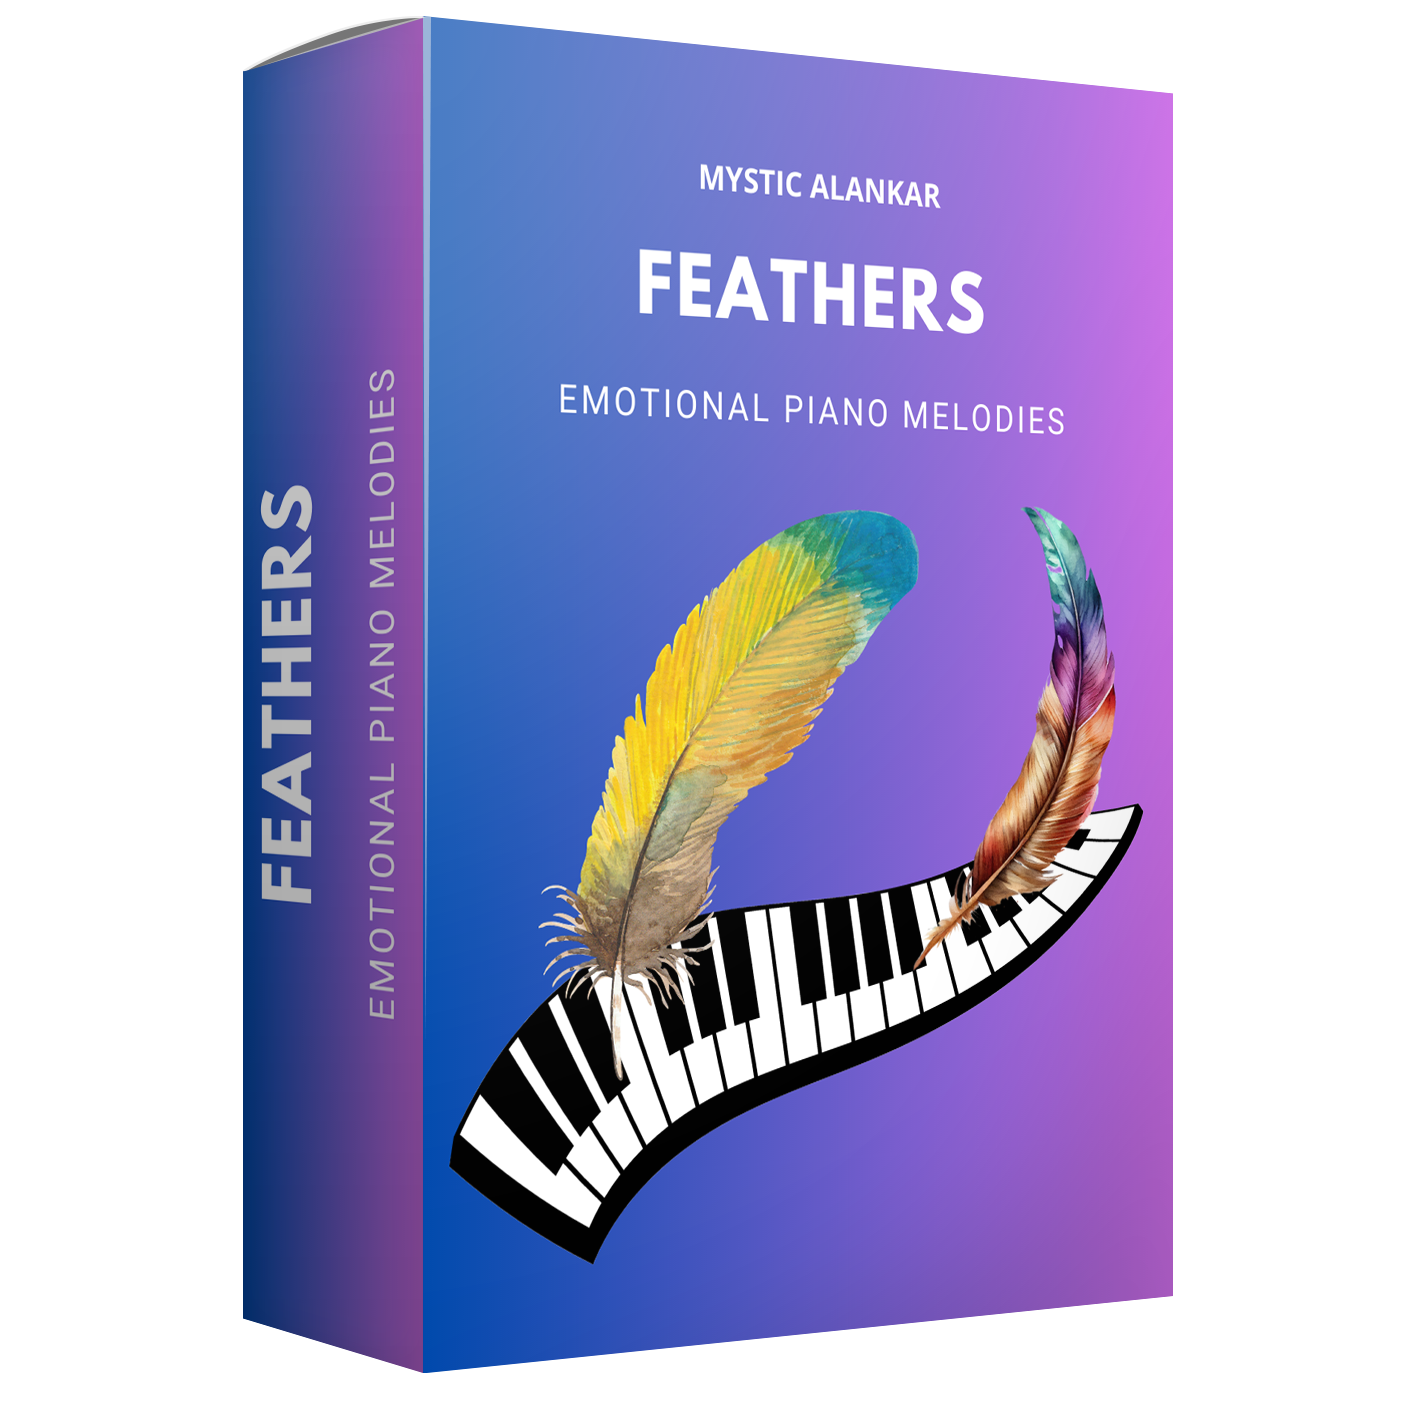 Feathers - Emotional Piano Melodies